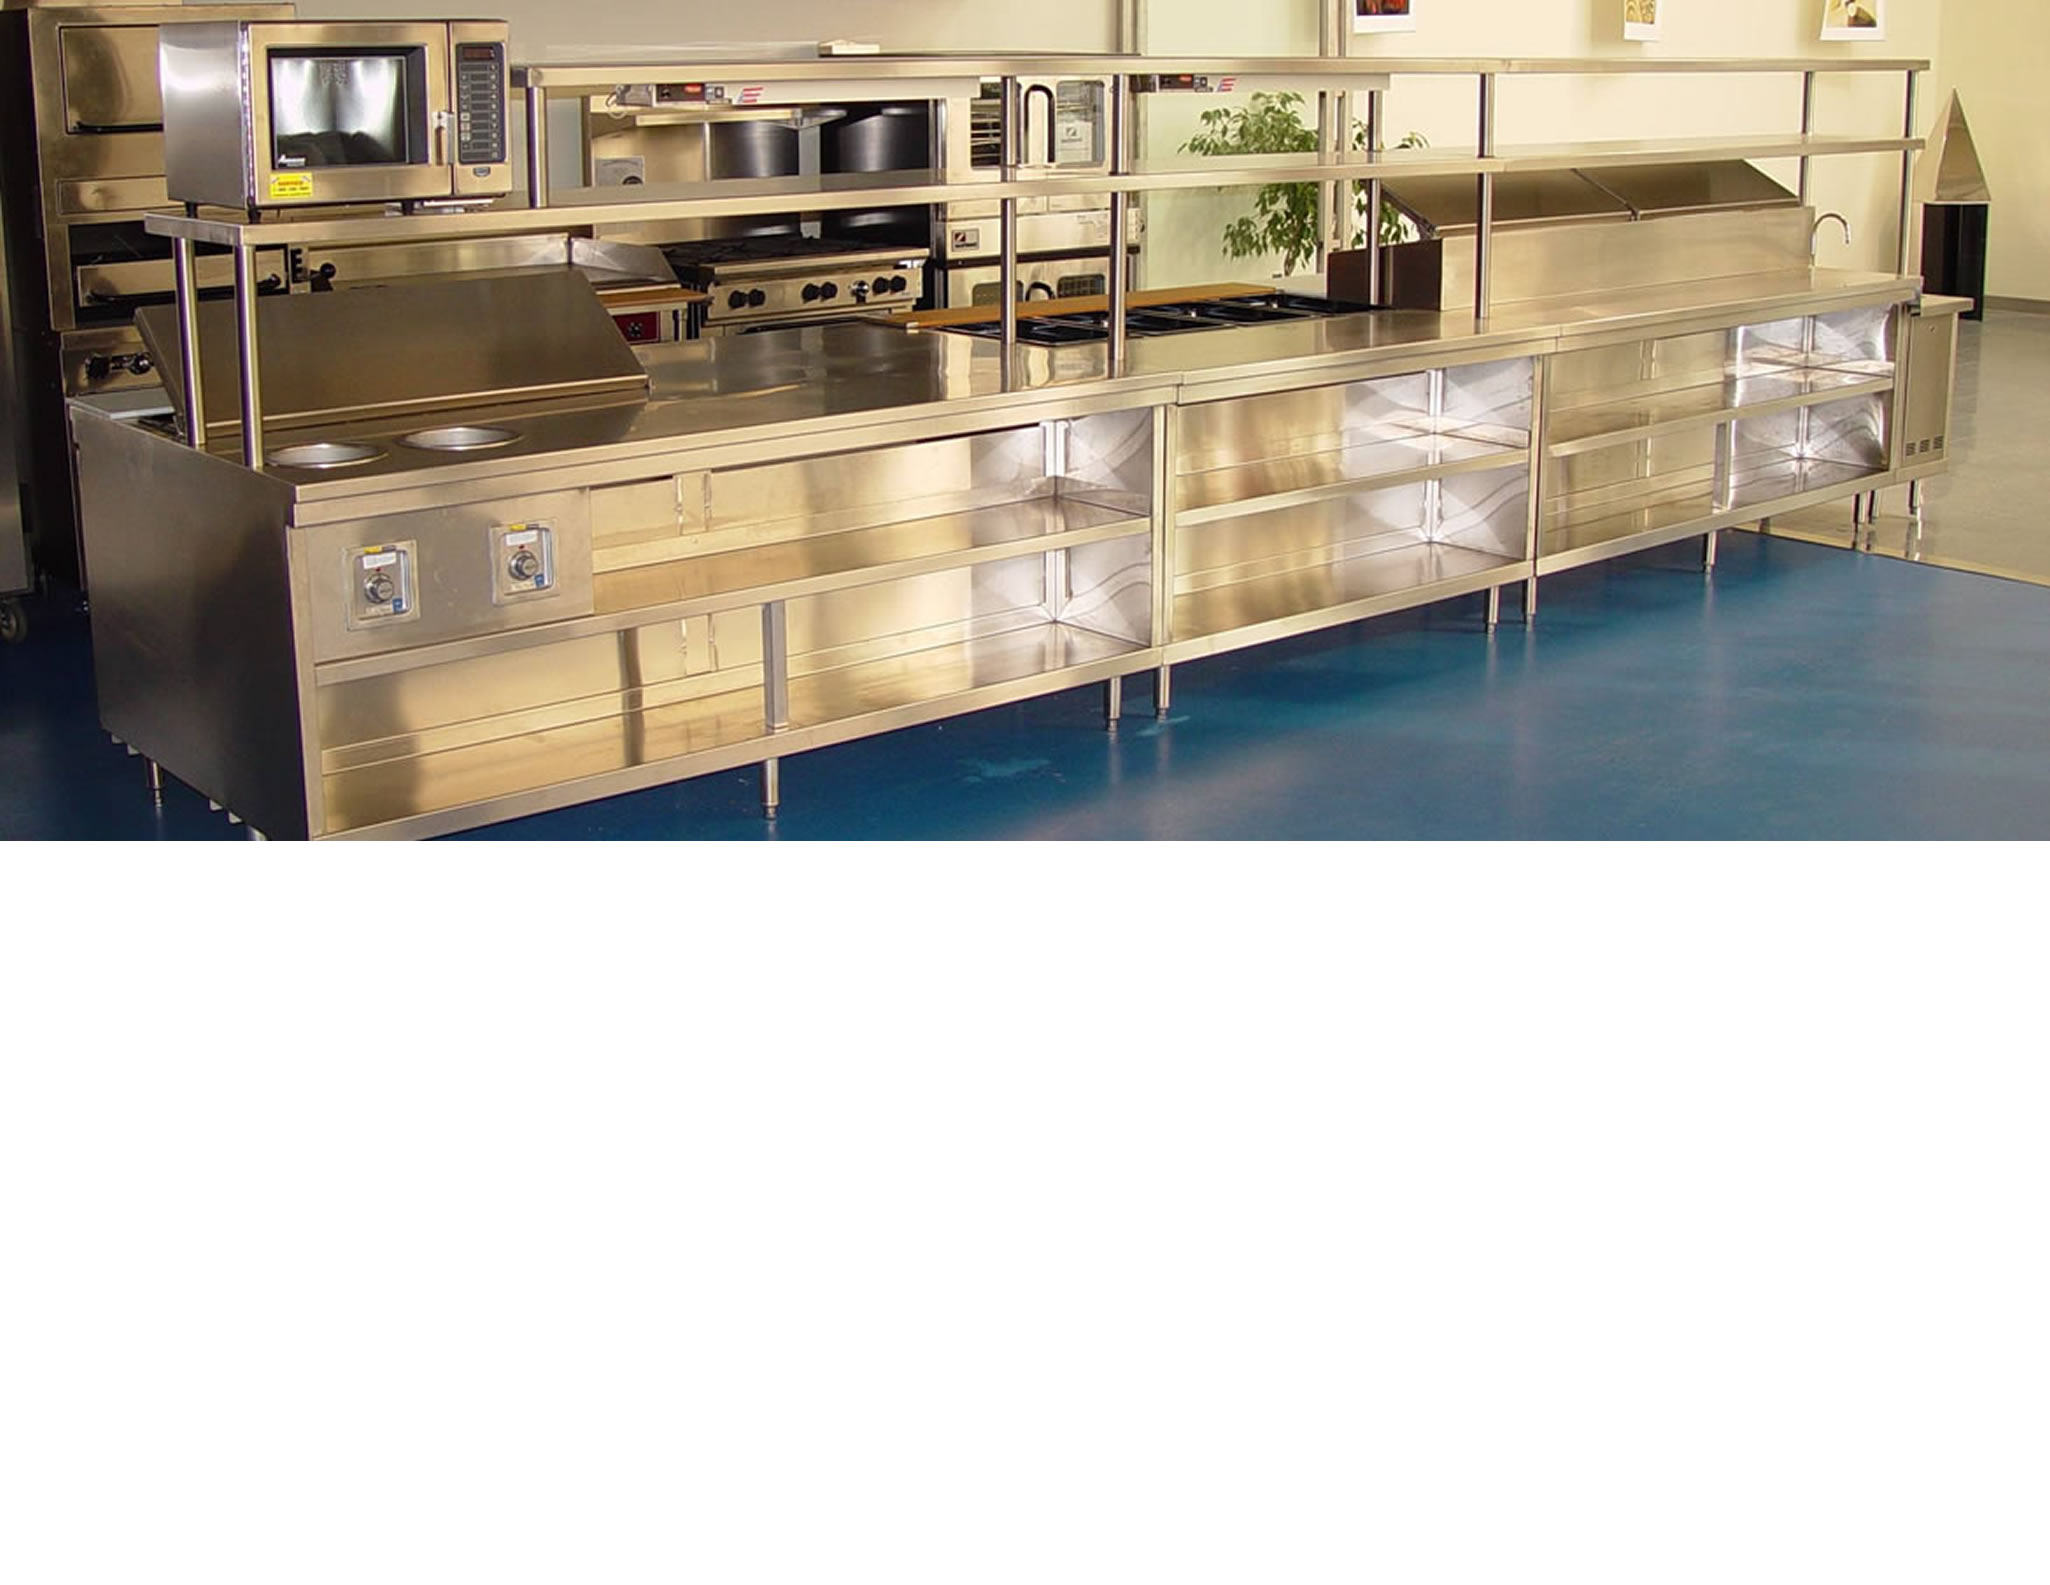 ASI EquipmentQuality Kitchen and Bar Equipment Commercial Quality Made in the U.S.A. Shop now!